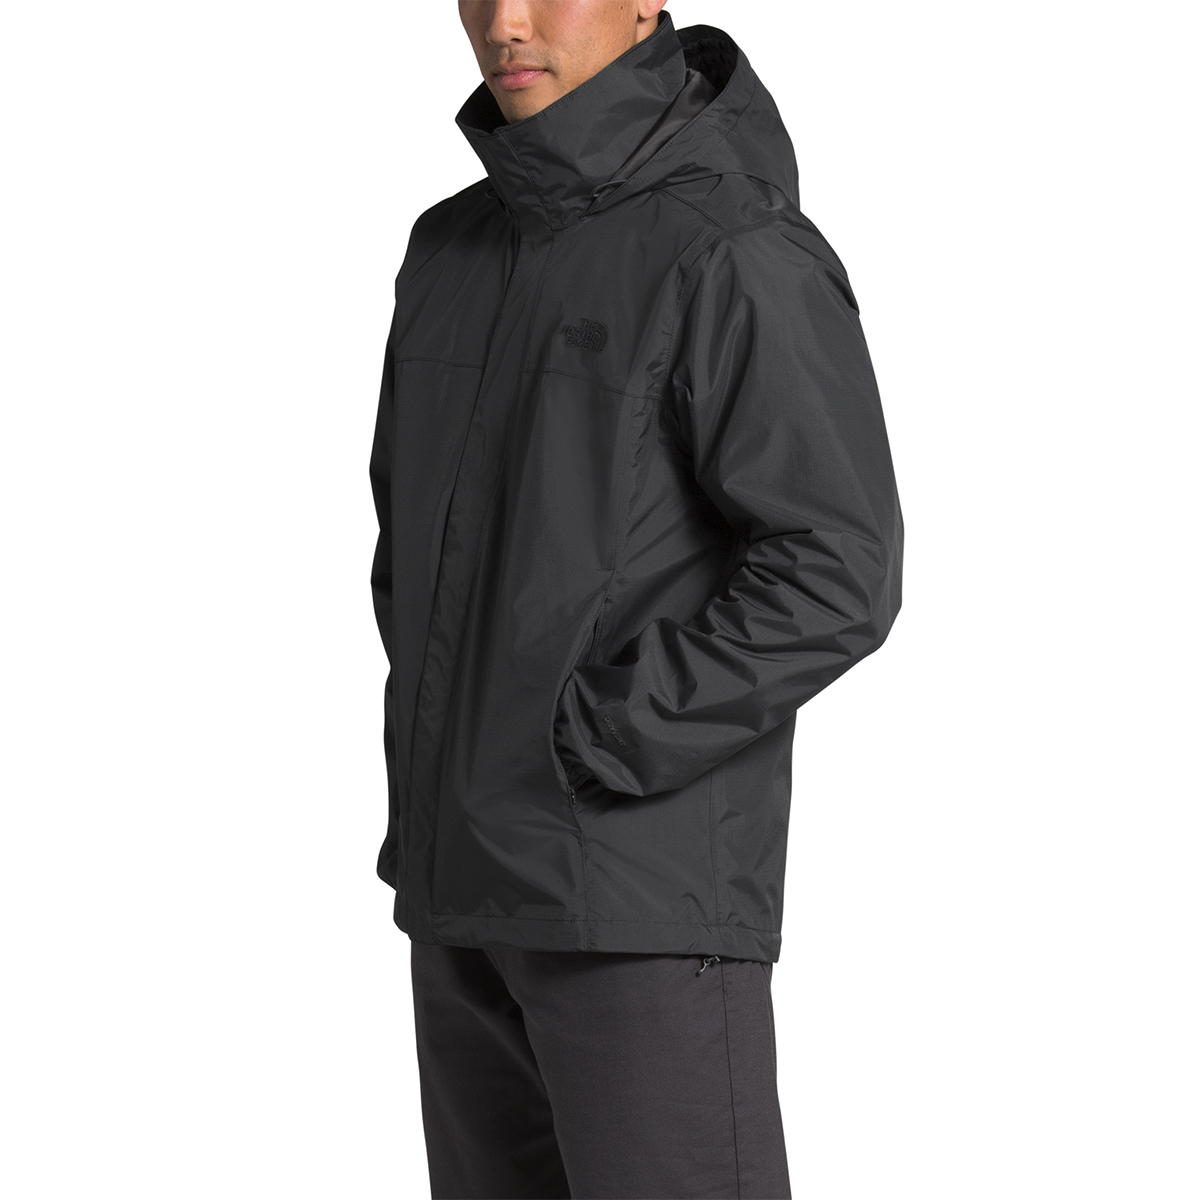 The North Face Men's Resolve 2 Jacket (various colors) $55 + Free Shipping